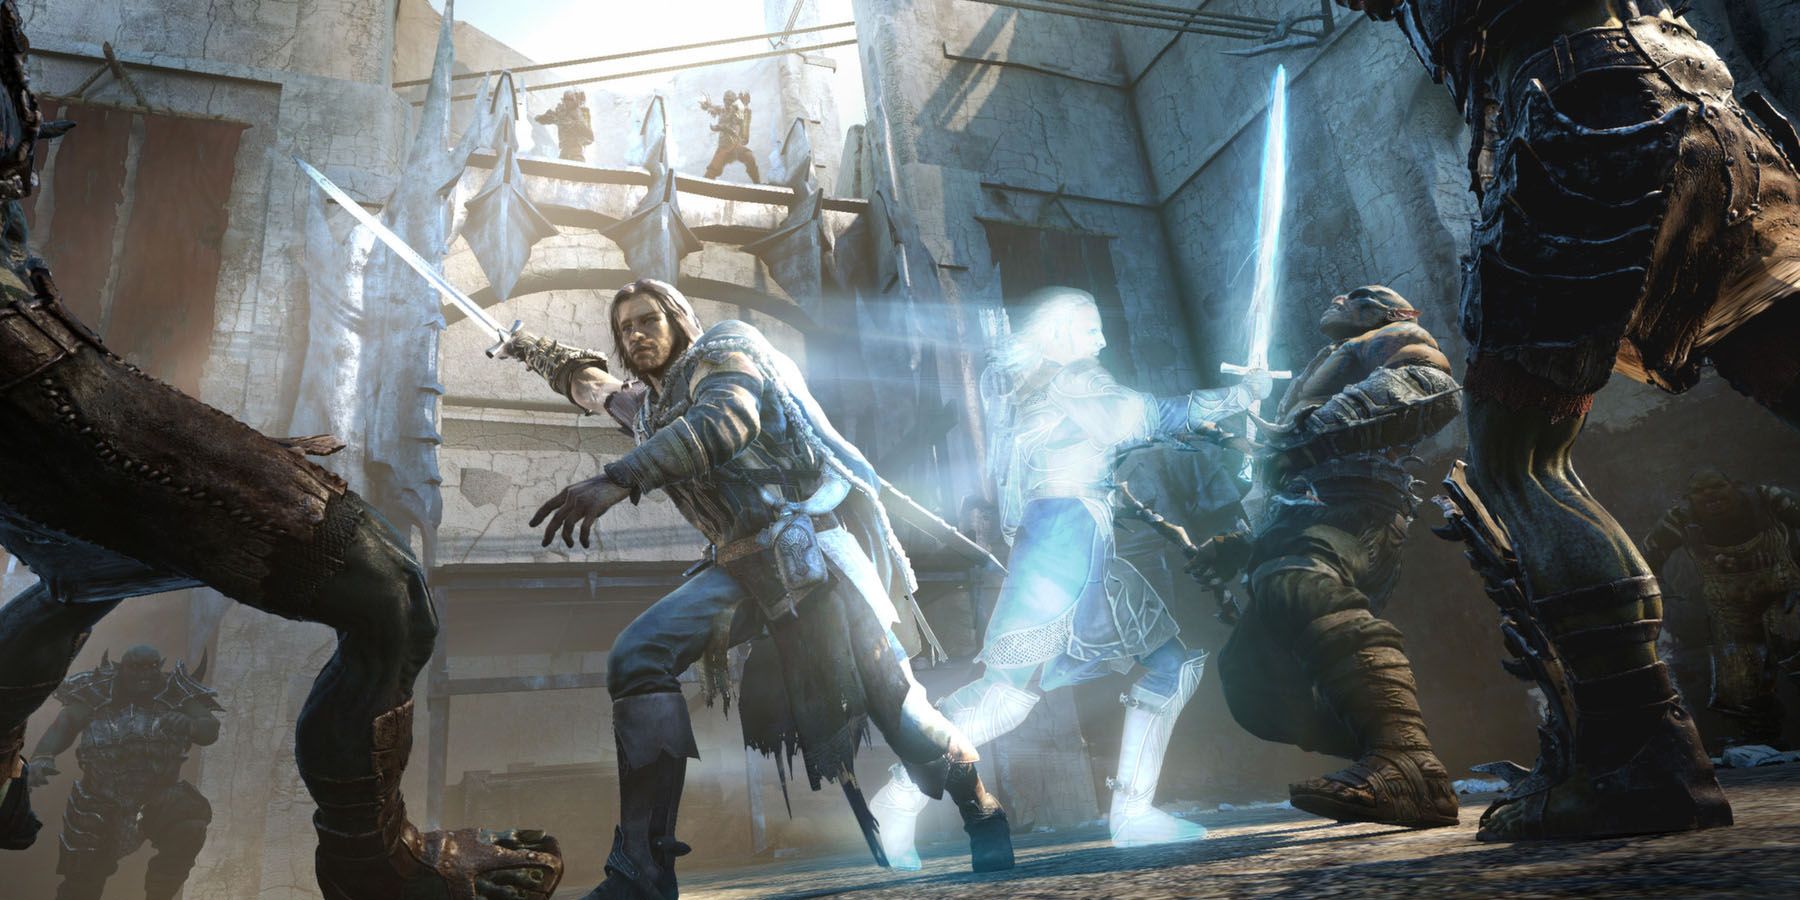 Middle-earth: Shadow Of Mordor – How To Level Up
Fast